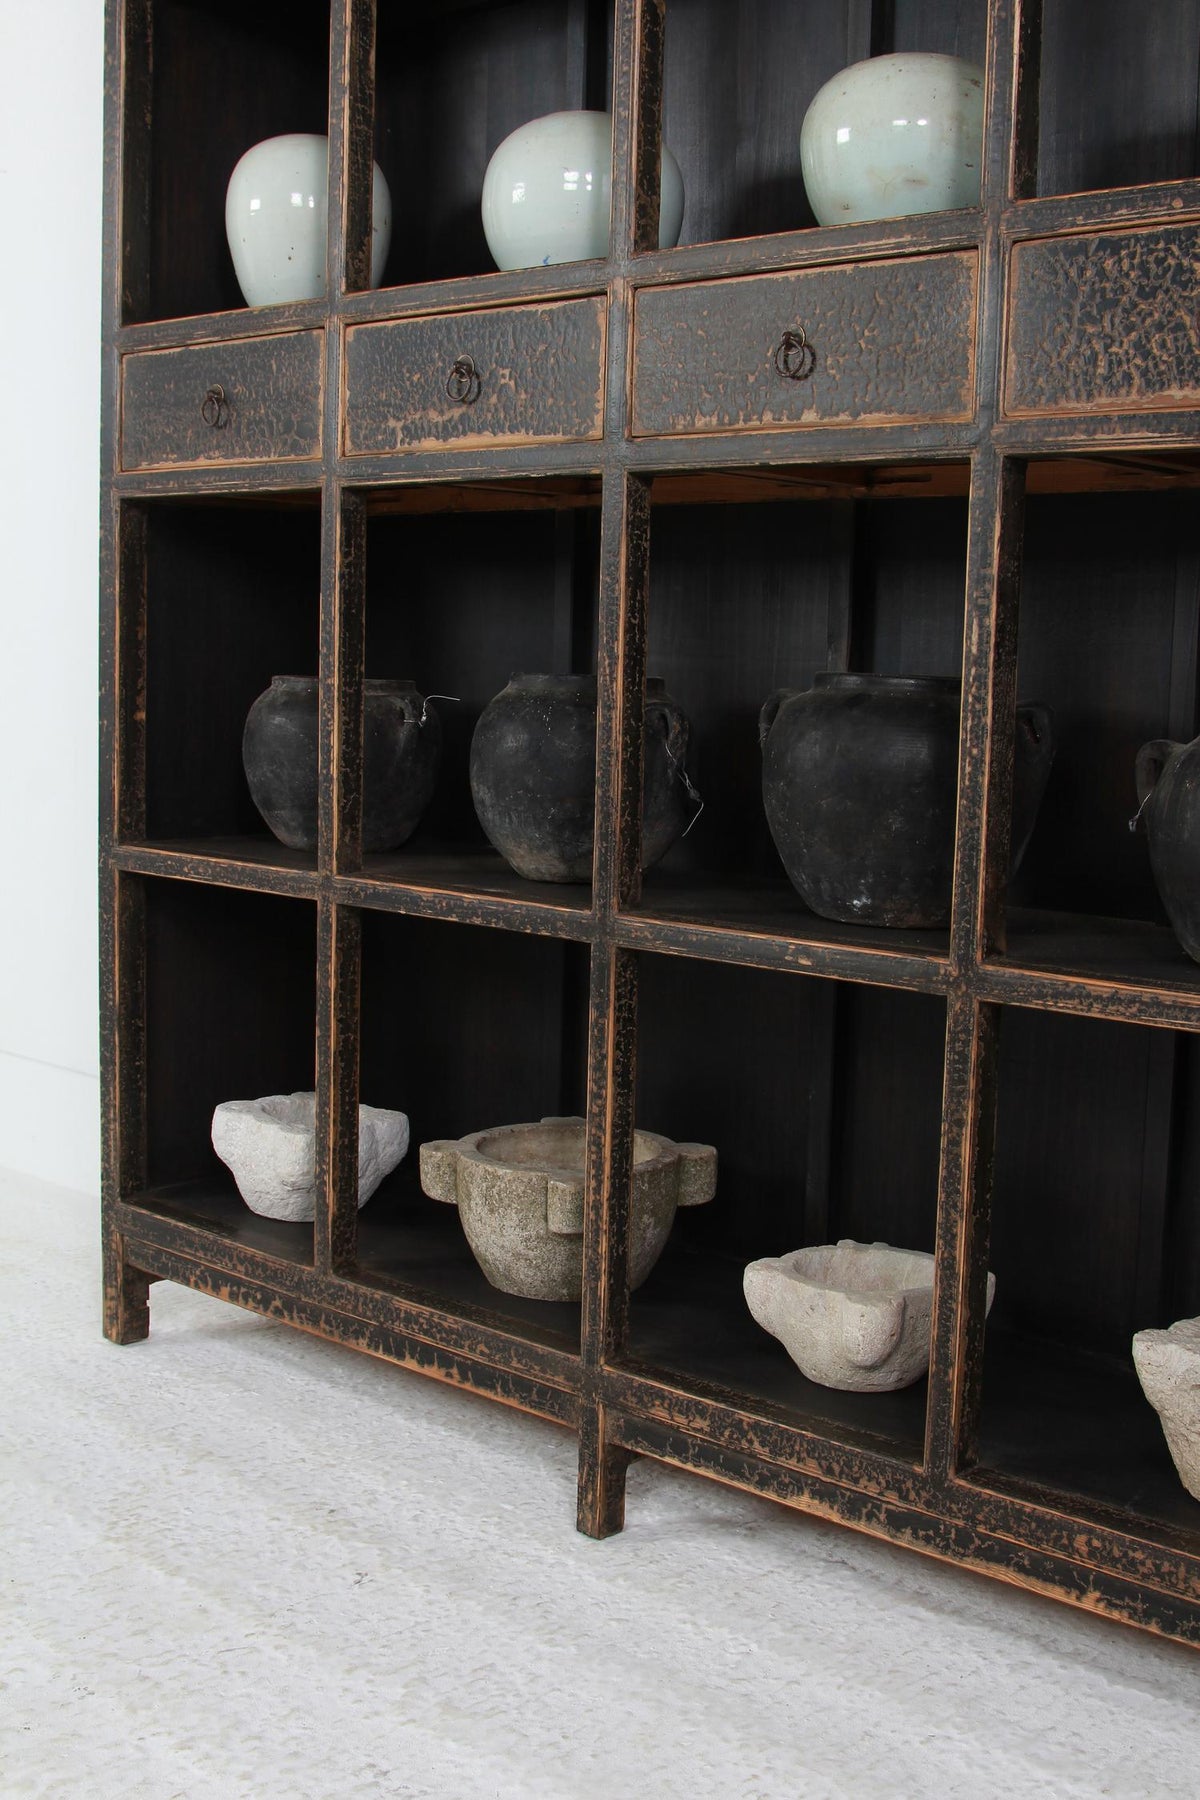 GRAND SCALE ANTIQUE BLACK PAINTED OPEN DISPLAY CABINET